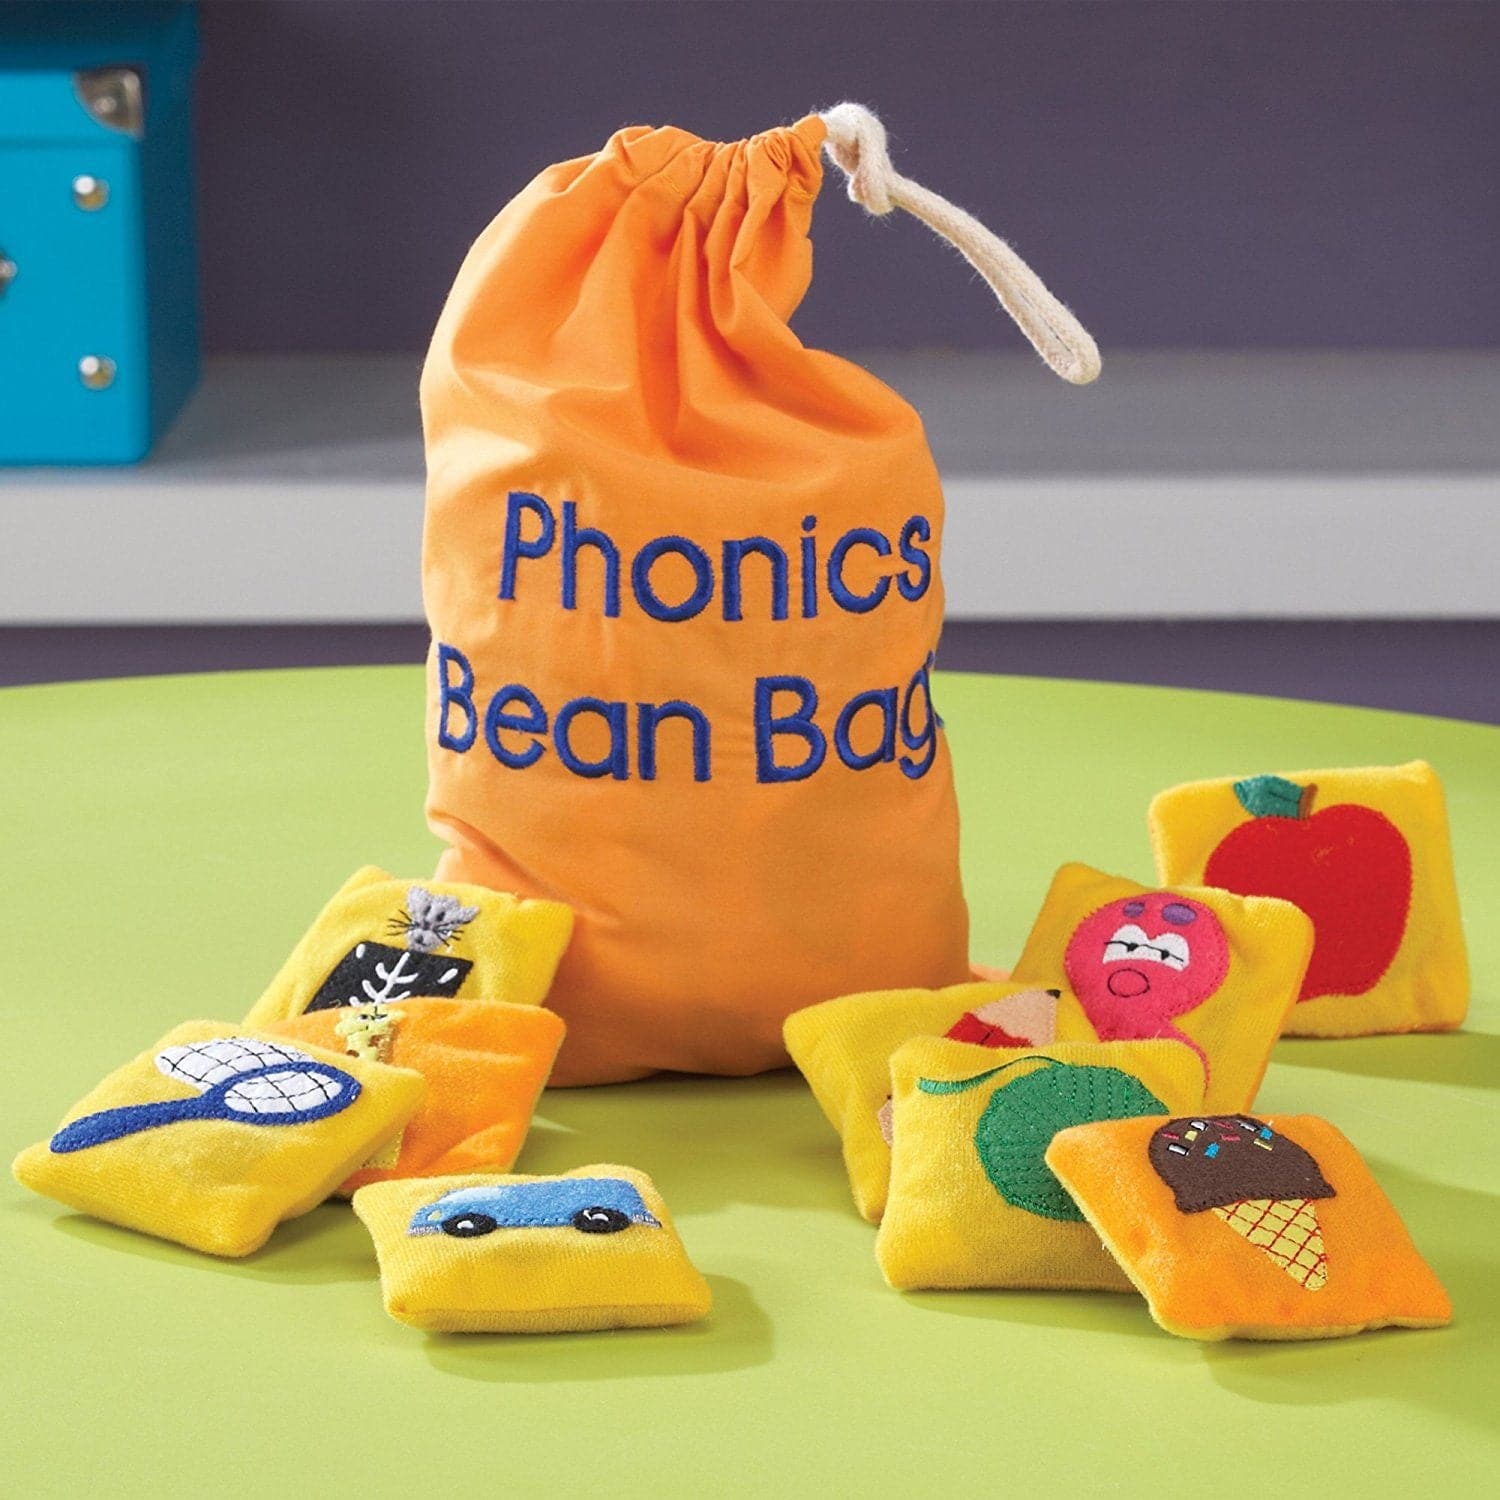 Phonics Bean Bags, These colourful 9cm embroidered Phonics bean bags are a great tactile way to reinforce letters and sounds. Each Phonic bean bag features an appealing picture representing the letter, with special double-sided bean bags for short and long vowel sounds, and the hard and soft sounds of c and g. The Phonic bean bag set Includes cloth storage bag and Activity Guide. Encourage phonic sound recall Each bean bag features a picture that represents a sound 26 embroidered bean bags Includes Activity